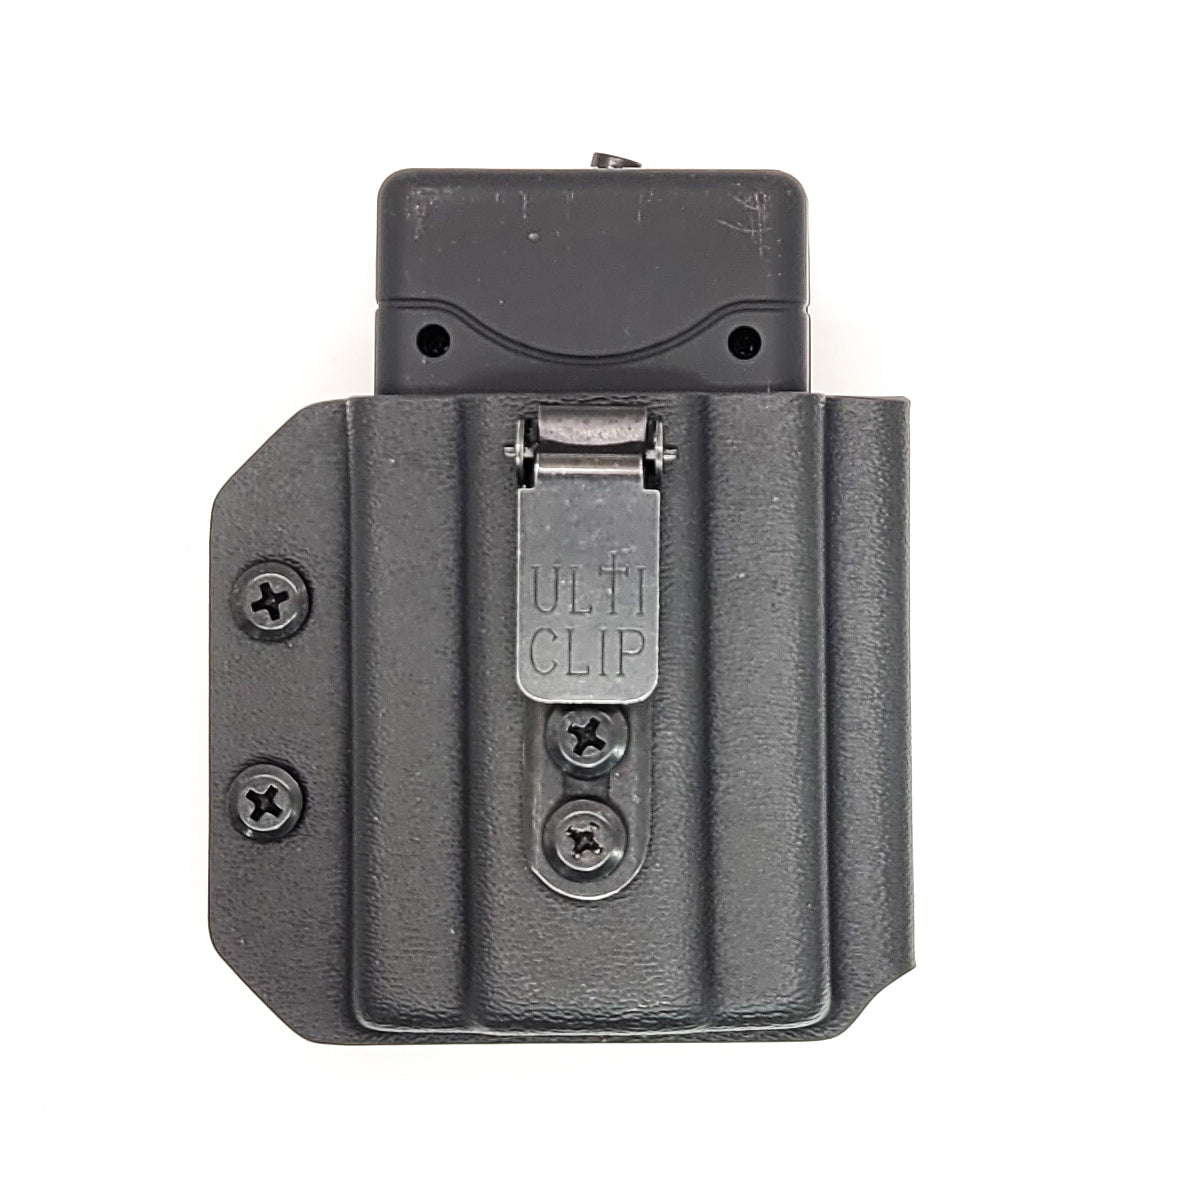 For the best Kydex IWB AIWB Holster Carrier Pouch for the Vipertek VTS-880 Stun Gun, shop Four Brothers Holsters. Lightweight, designed and built around the needs of those who exercise regularly and want to carry non-lethal self-protection. The holster will not allow accidental discharge while in the holster.